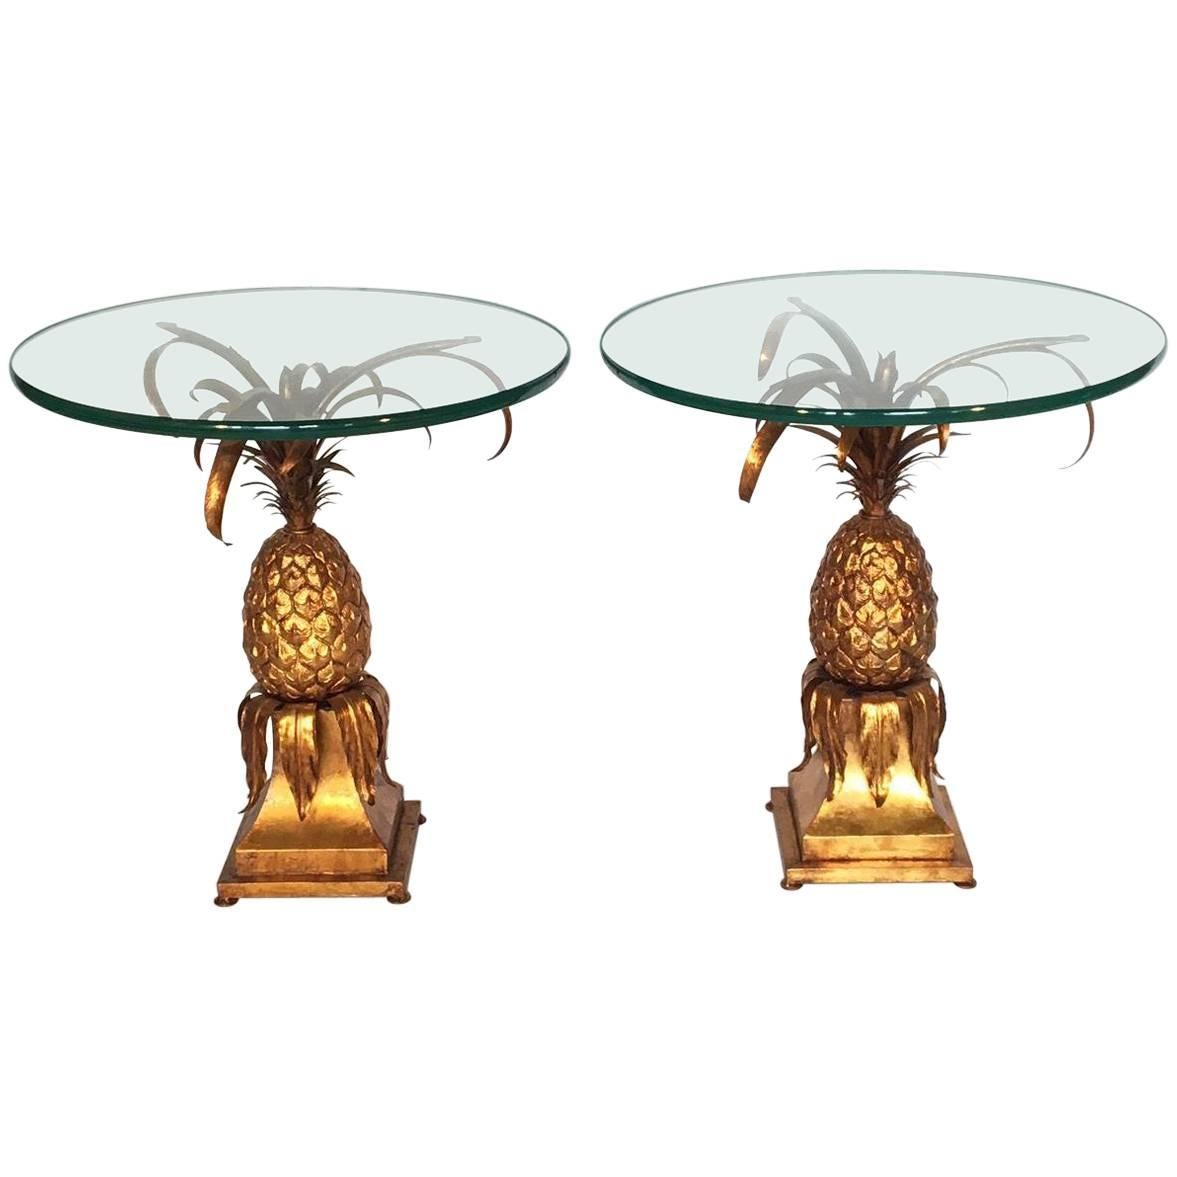 Pair of Sculptural Tole Gold Gilt Pineapple Side Tables